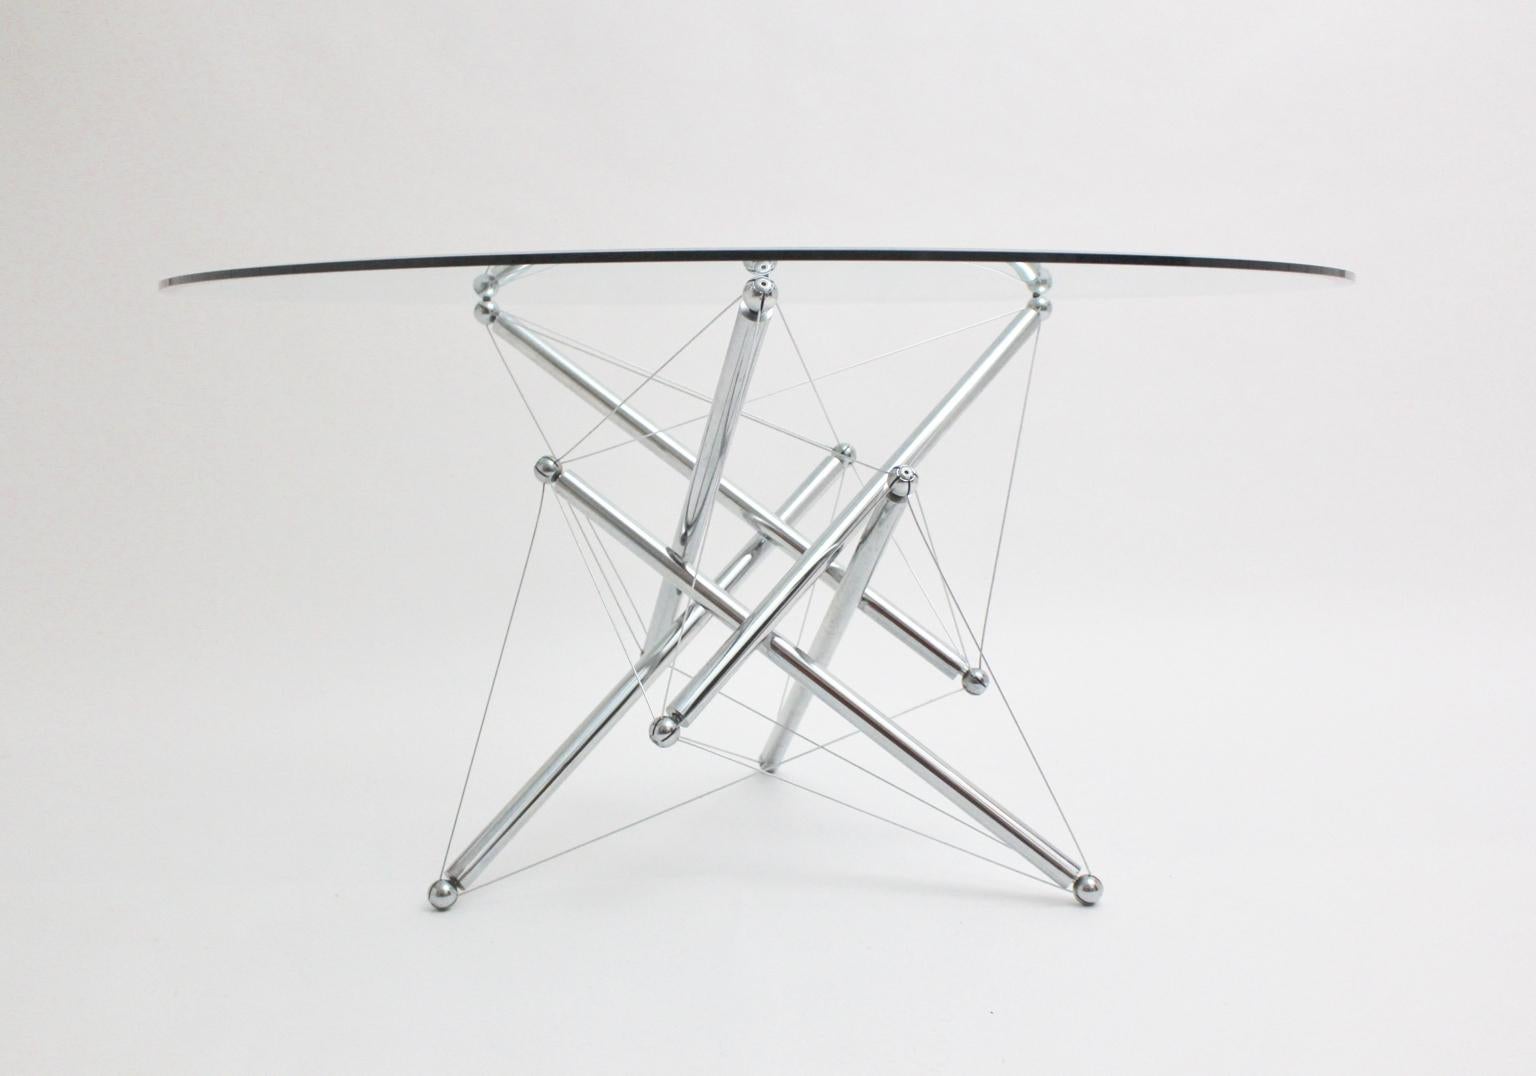 Modern vintage dining table from chromium plated steel base and a clear glass top style Theodore Waddell, 1980s.
This dining table consists of polished chromium plated steel base and a clear glass top. The glass top shows a facetted thick glass